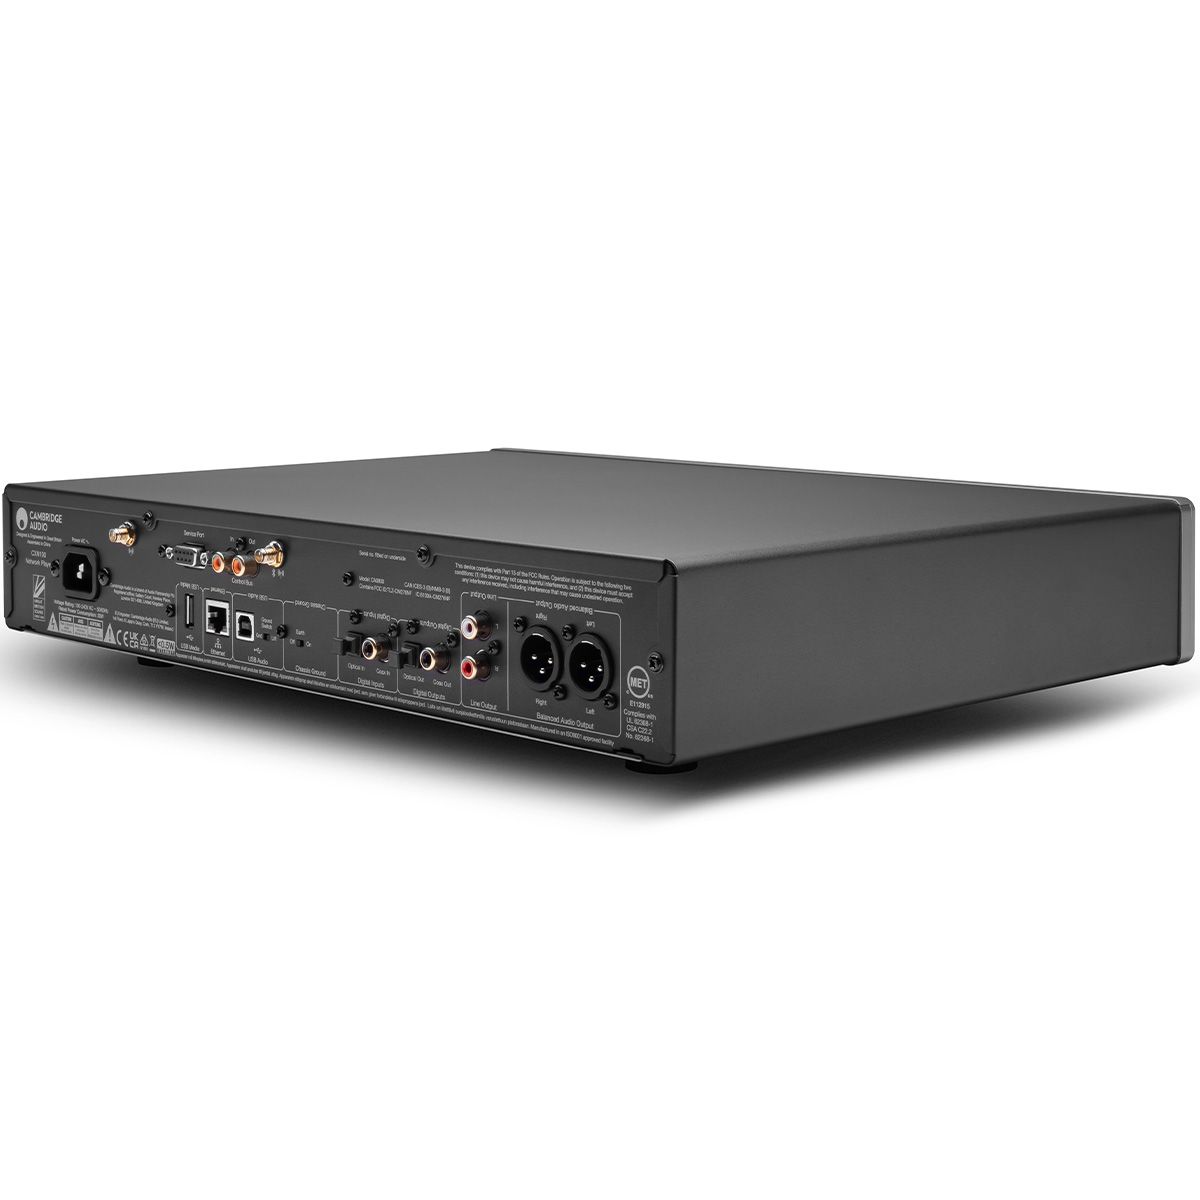 Cambridge CXN100 Network Player - Lunar Grey angled right rear view